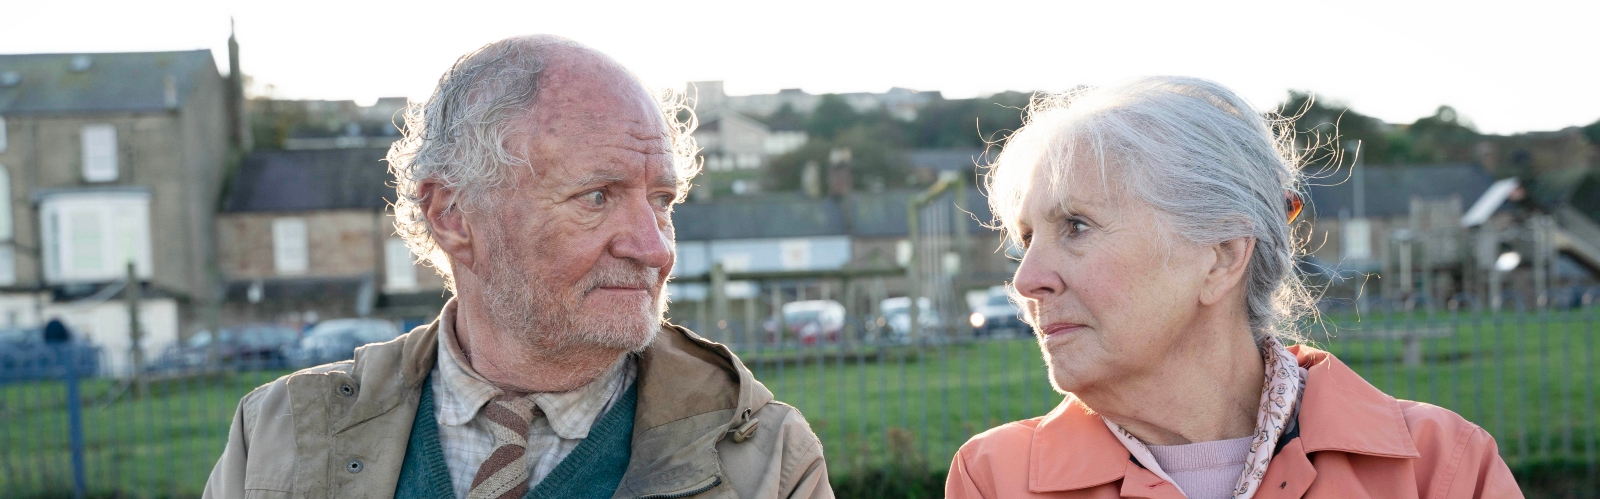 An image of Jim Broadbent and Dame Penelope Wilton smiling at each other